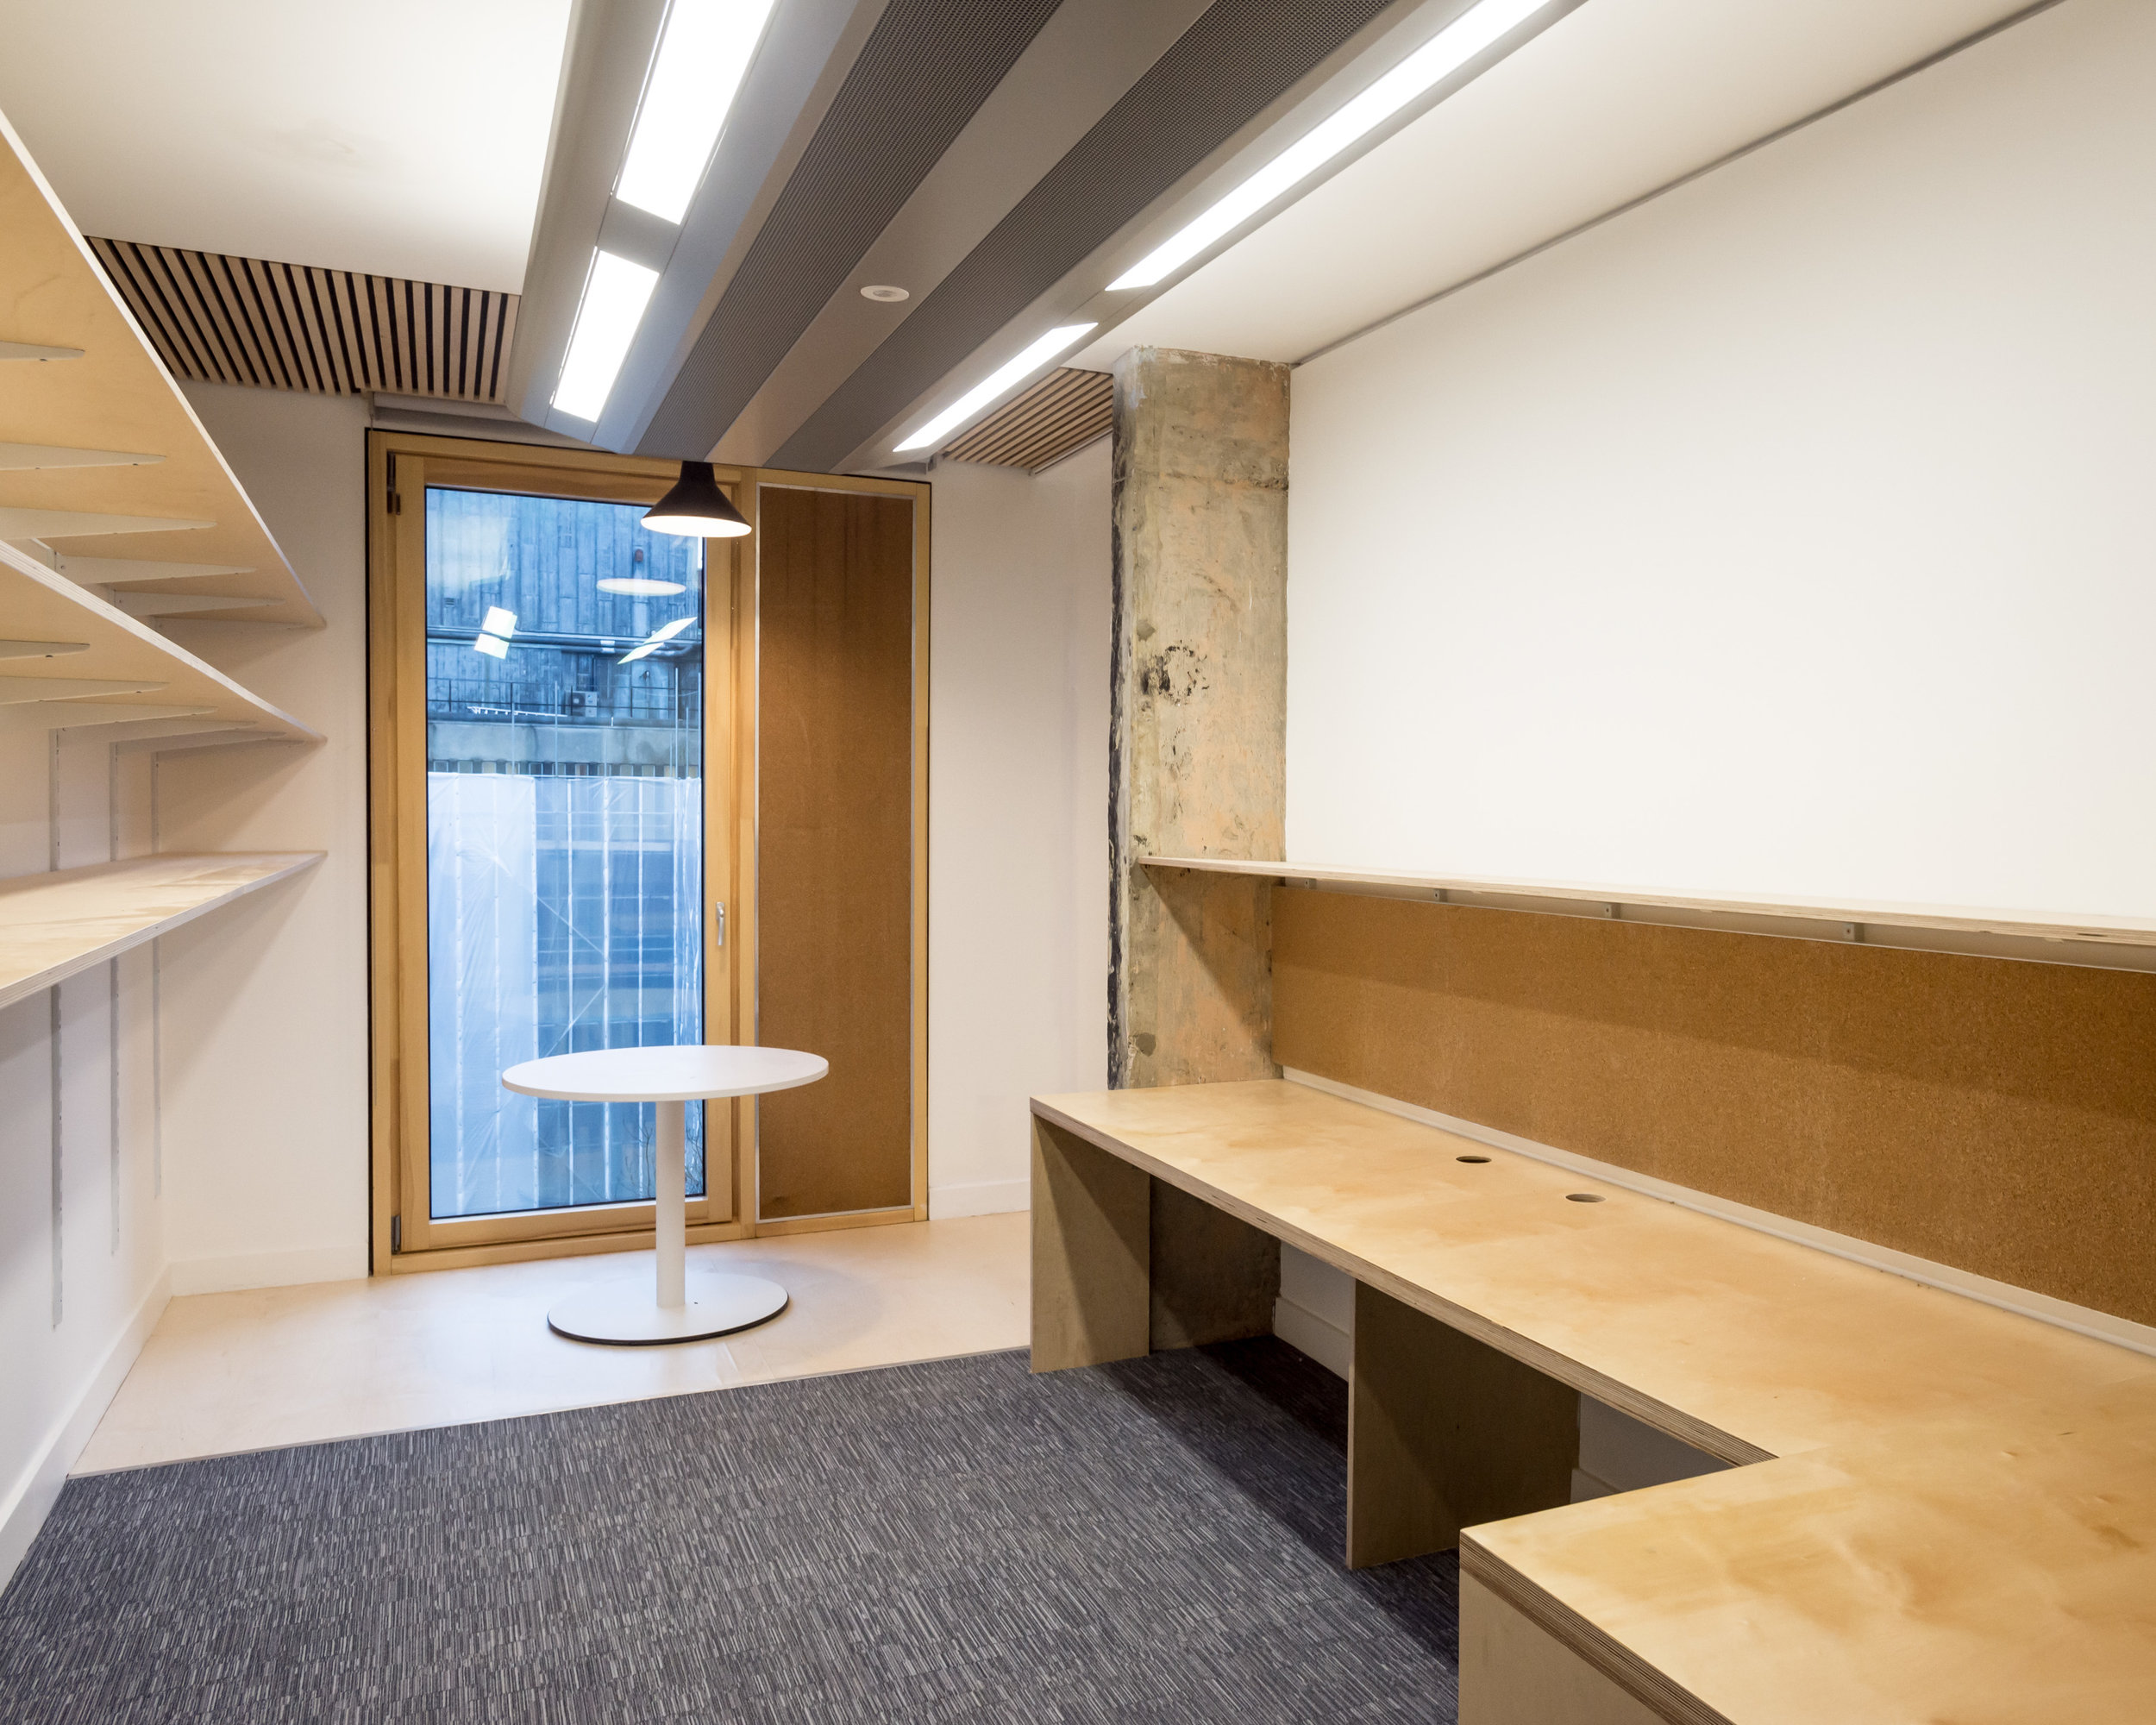  Lecturers office in the refurbished Bartlett School of Architecture, 22 Gordon Street. London by Hawkins/Brown Architects 